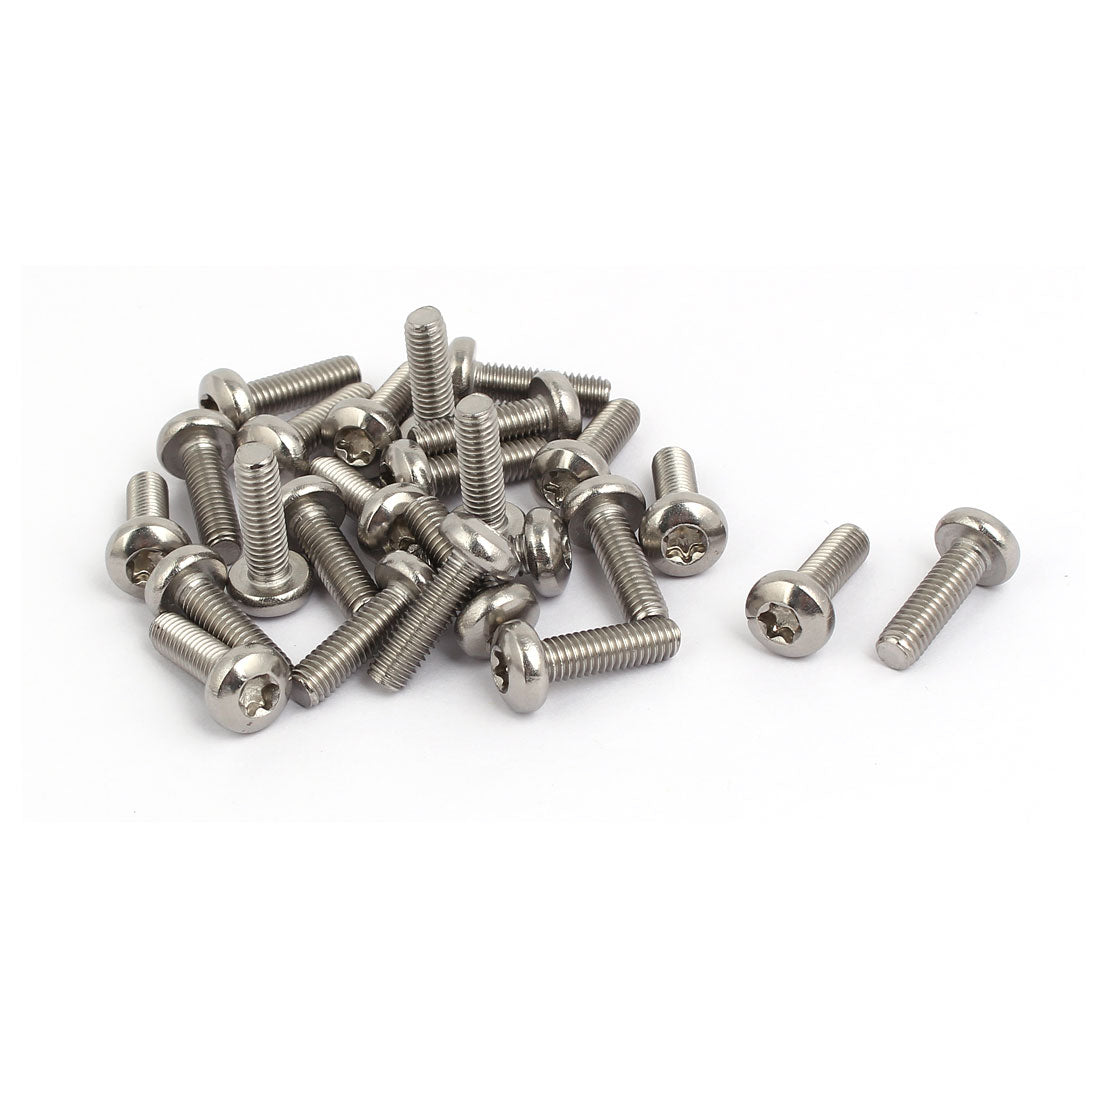 uxcell Uxcell M6x20mm 304 Stainless Steel Button Head Torx Socket Cap Screws Fasteners 25pcs